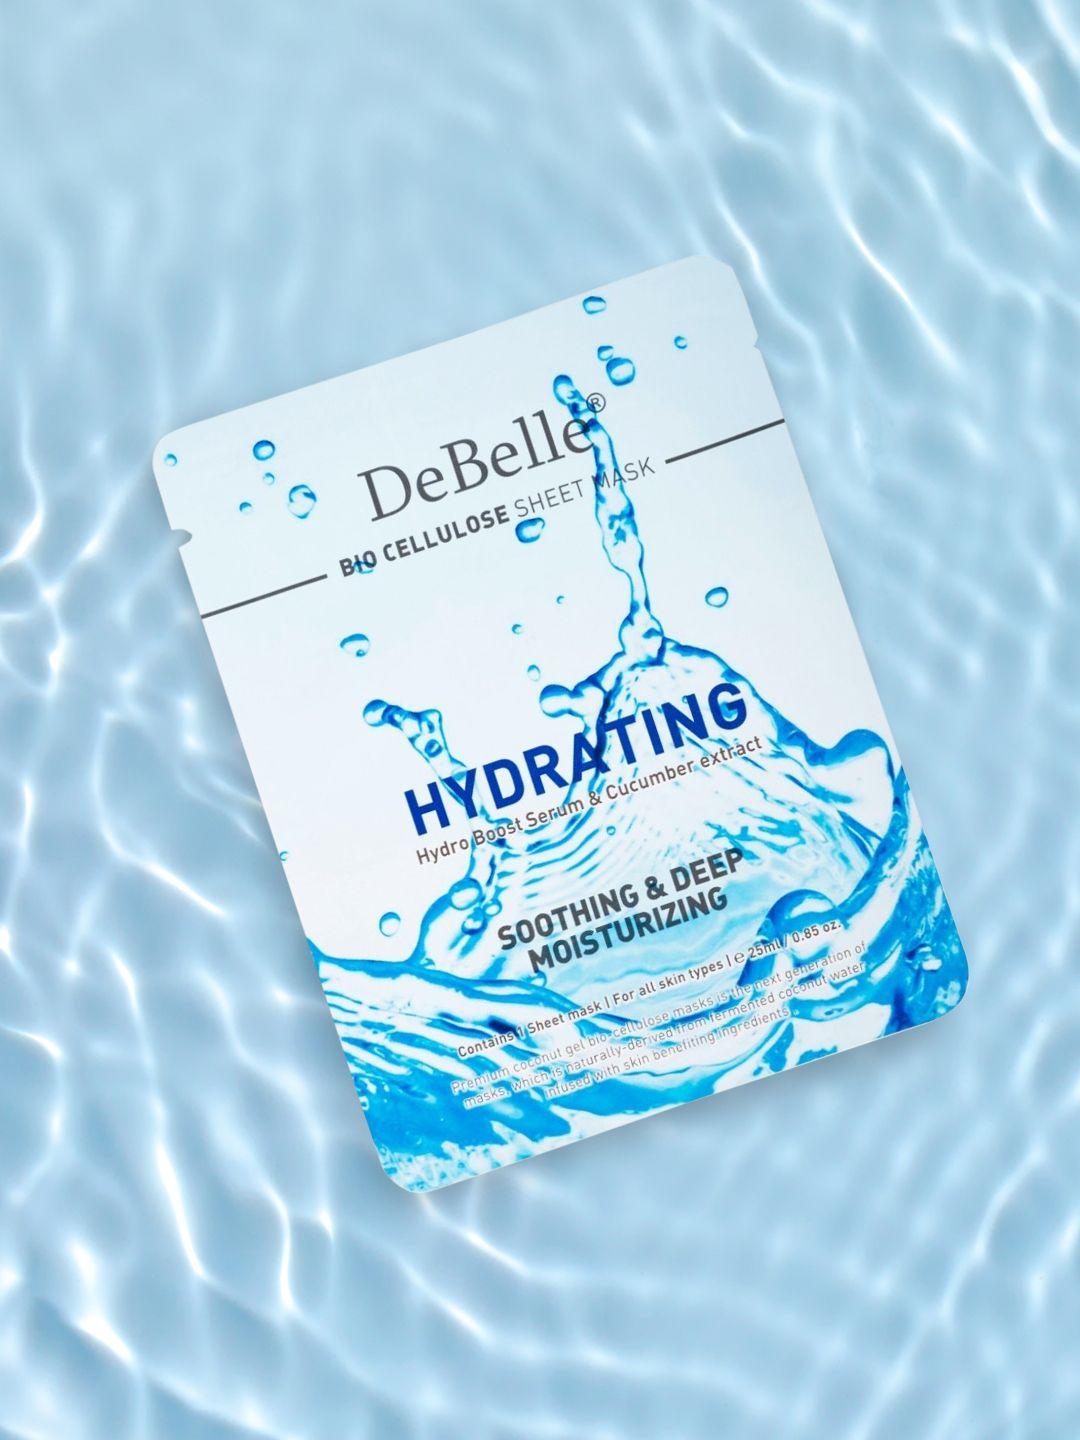 debelle bio cellulose sheet mask - hydrating